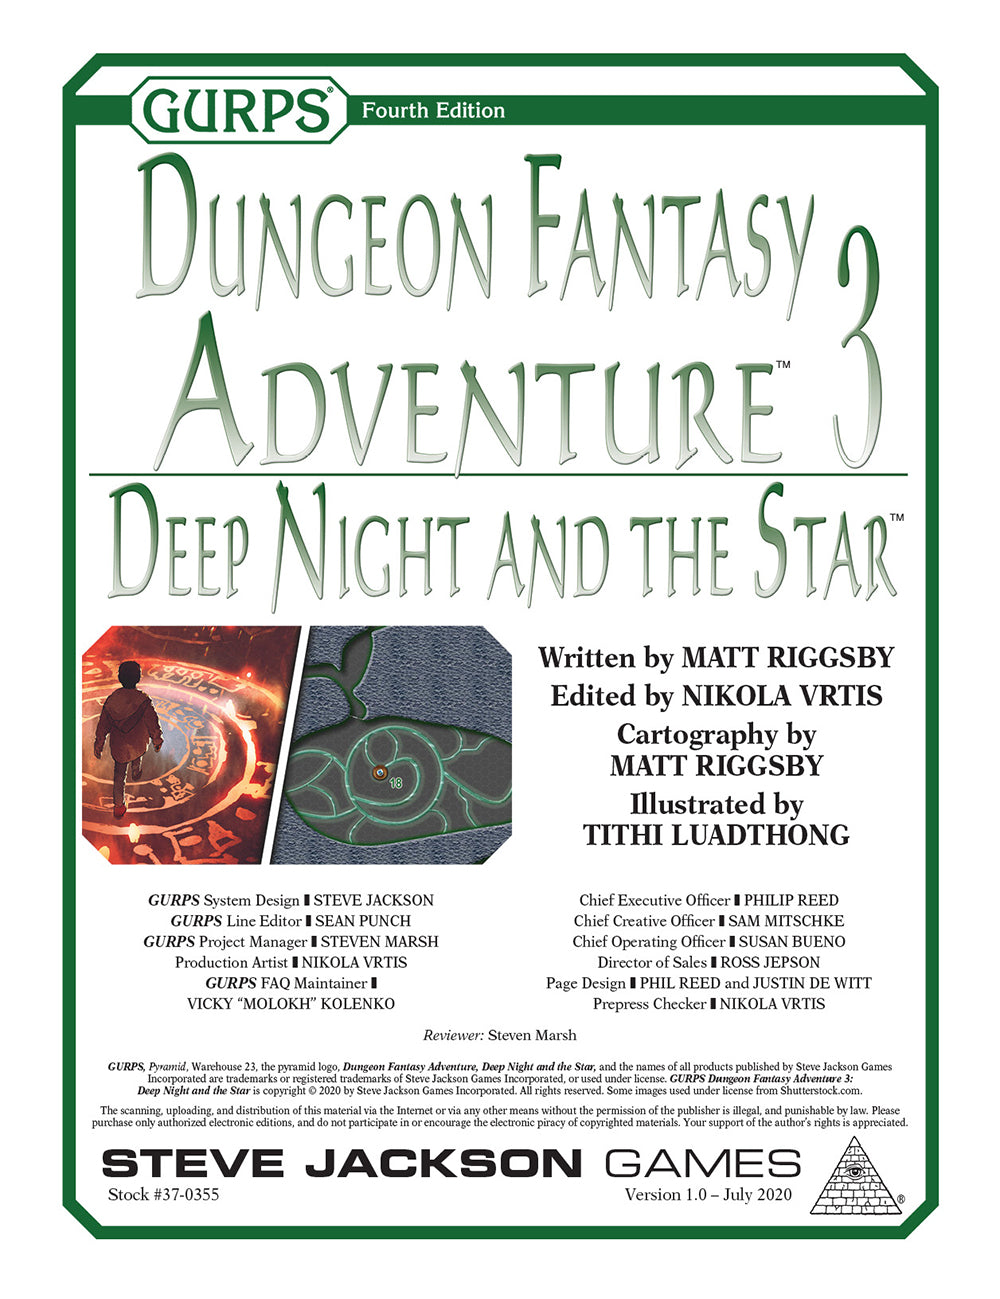 GURPS Dungeon Fantasy Adventure 3: Deep Night and the Star